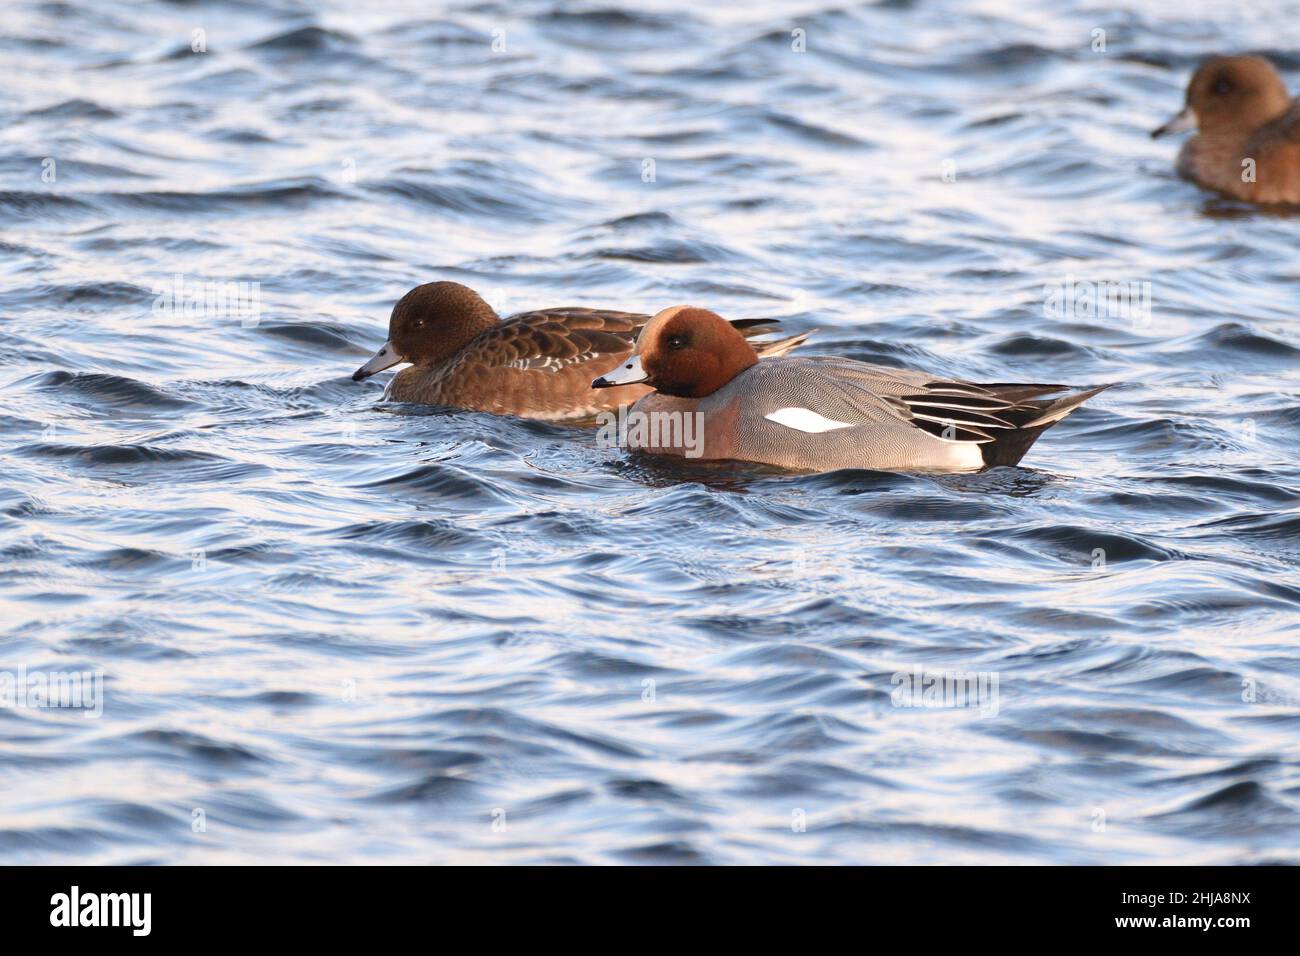 Eurasian Wigeon taking a swim in a lake on a cloudy, winter day. Hertfordshire, England, UK. Stock Photo